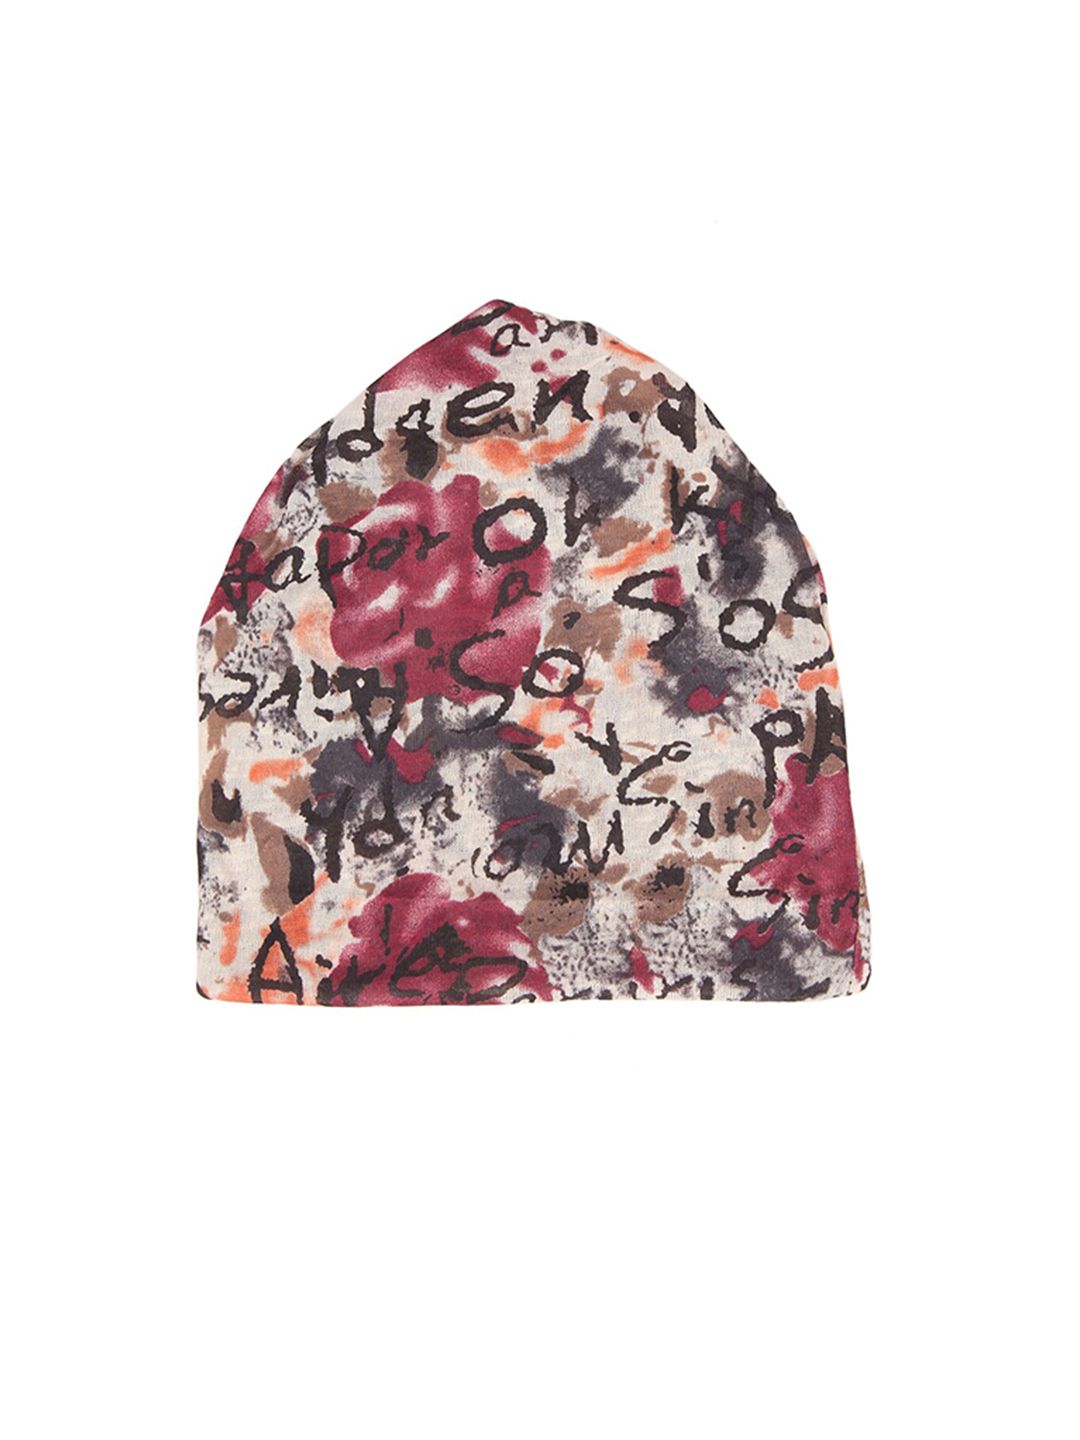 iSWEVEN Unisex White & Black Printed Beanie Price in India